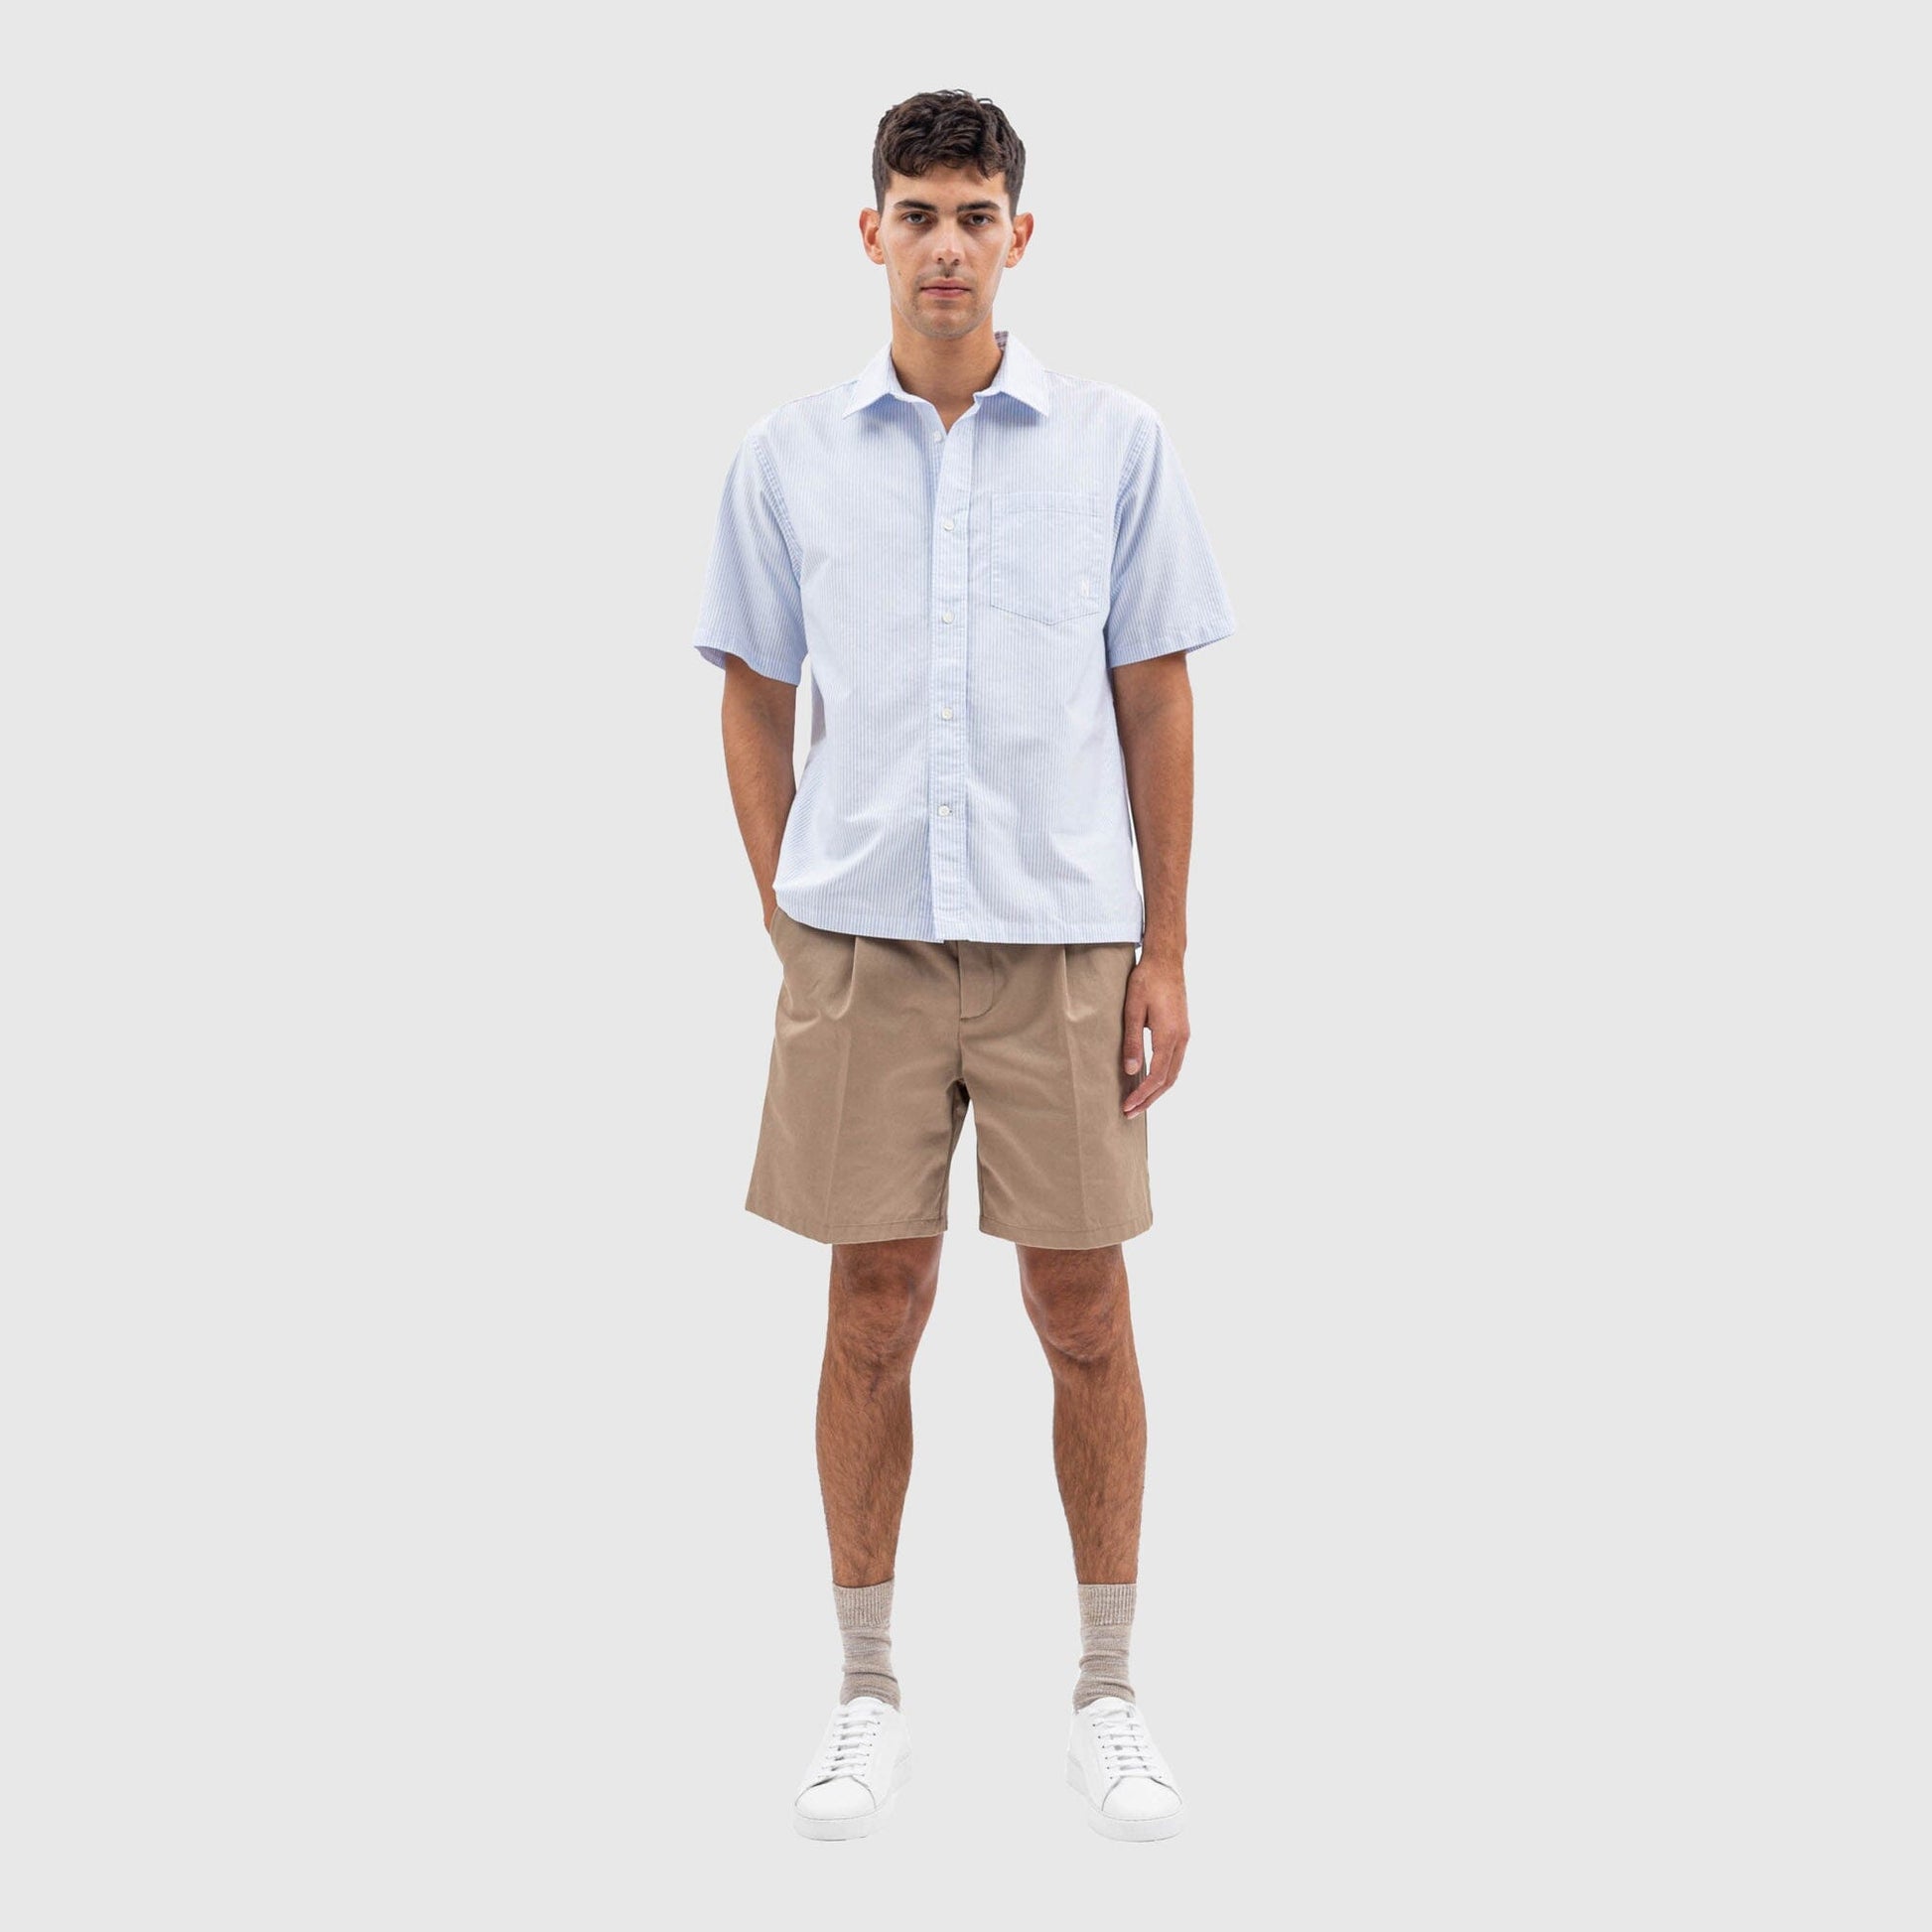 Norse Projects Ivan Shirt - Blue Stripe Shirt Norse Projects 